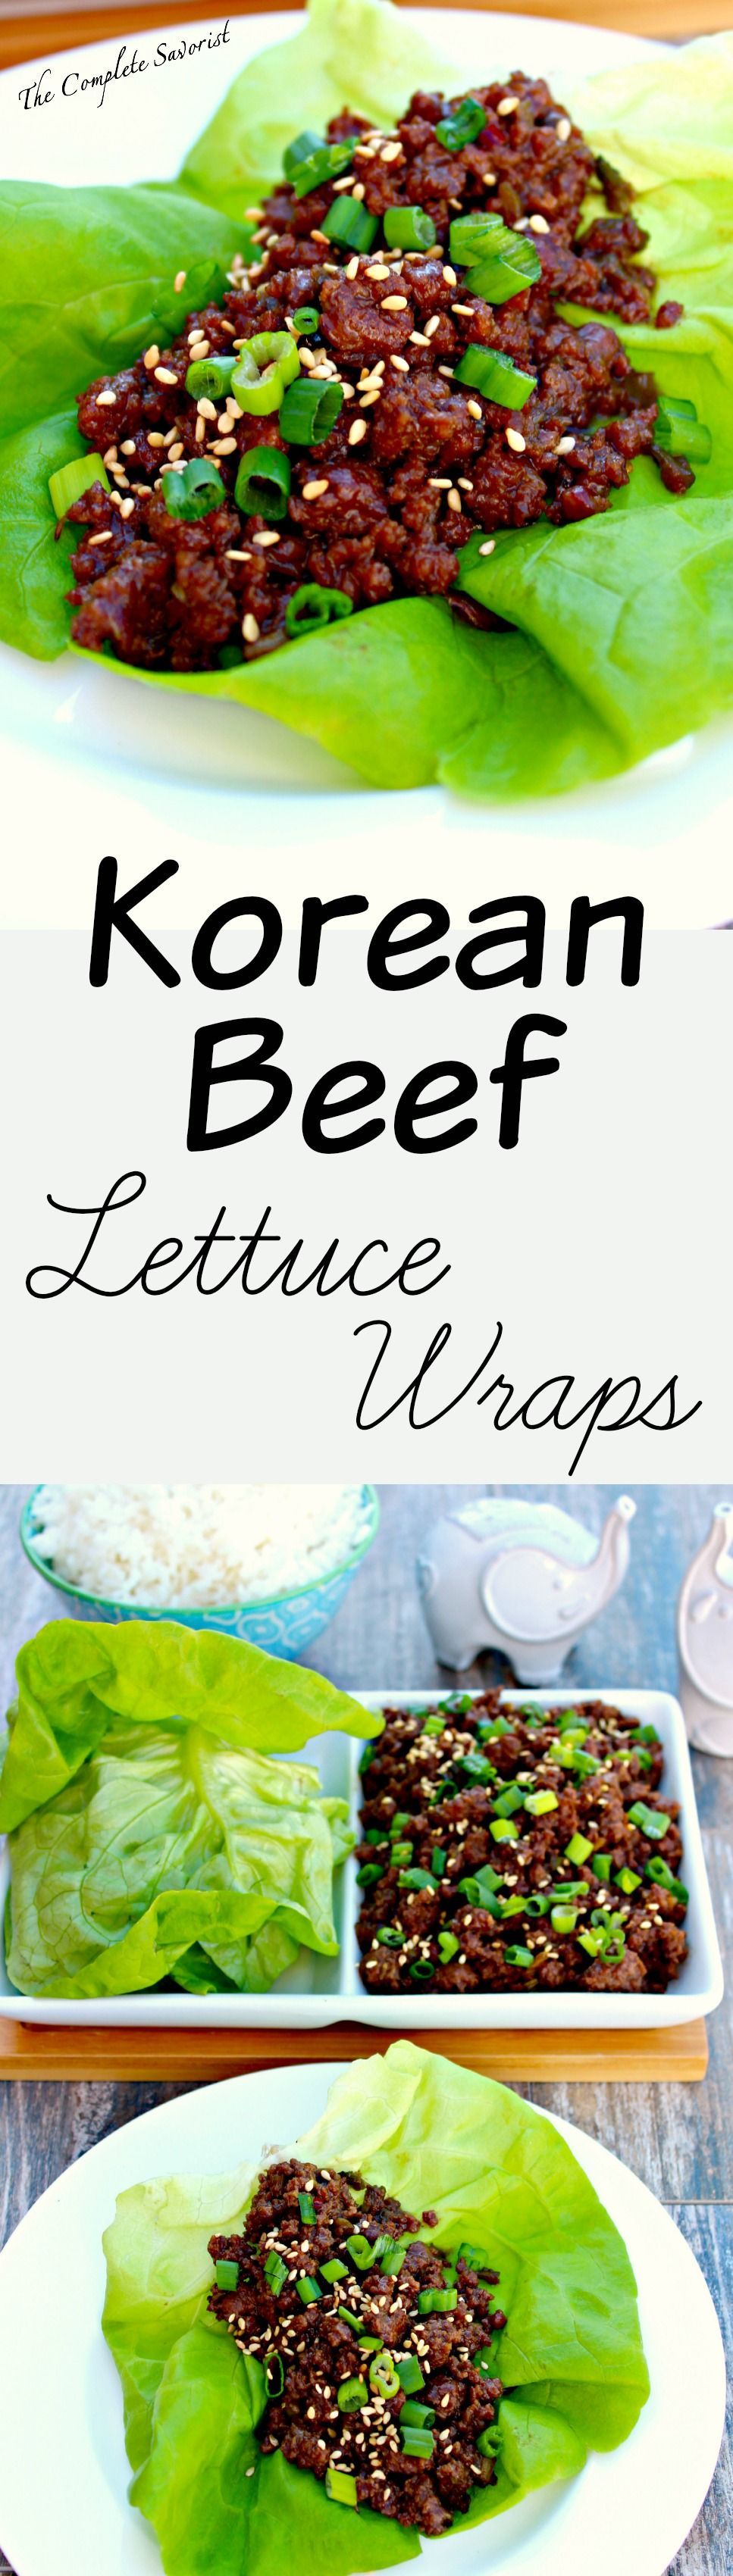 Korean Beef Lettuce Wraps ~ Sweet and mildly spiced beef served in a lettuce leaf. ~ The Complete Savorist